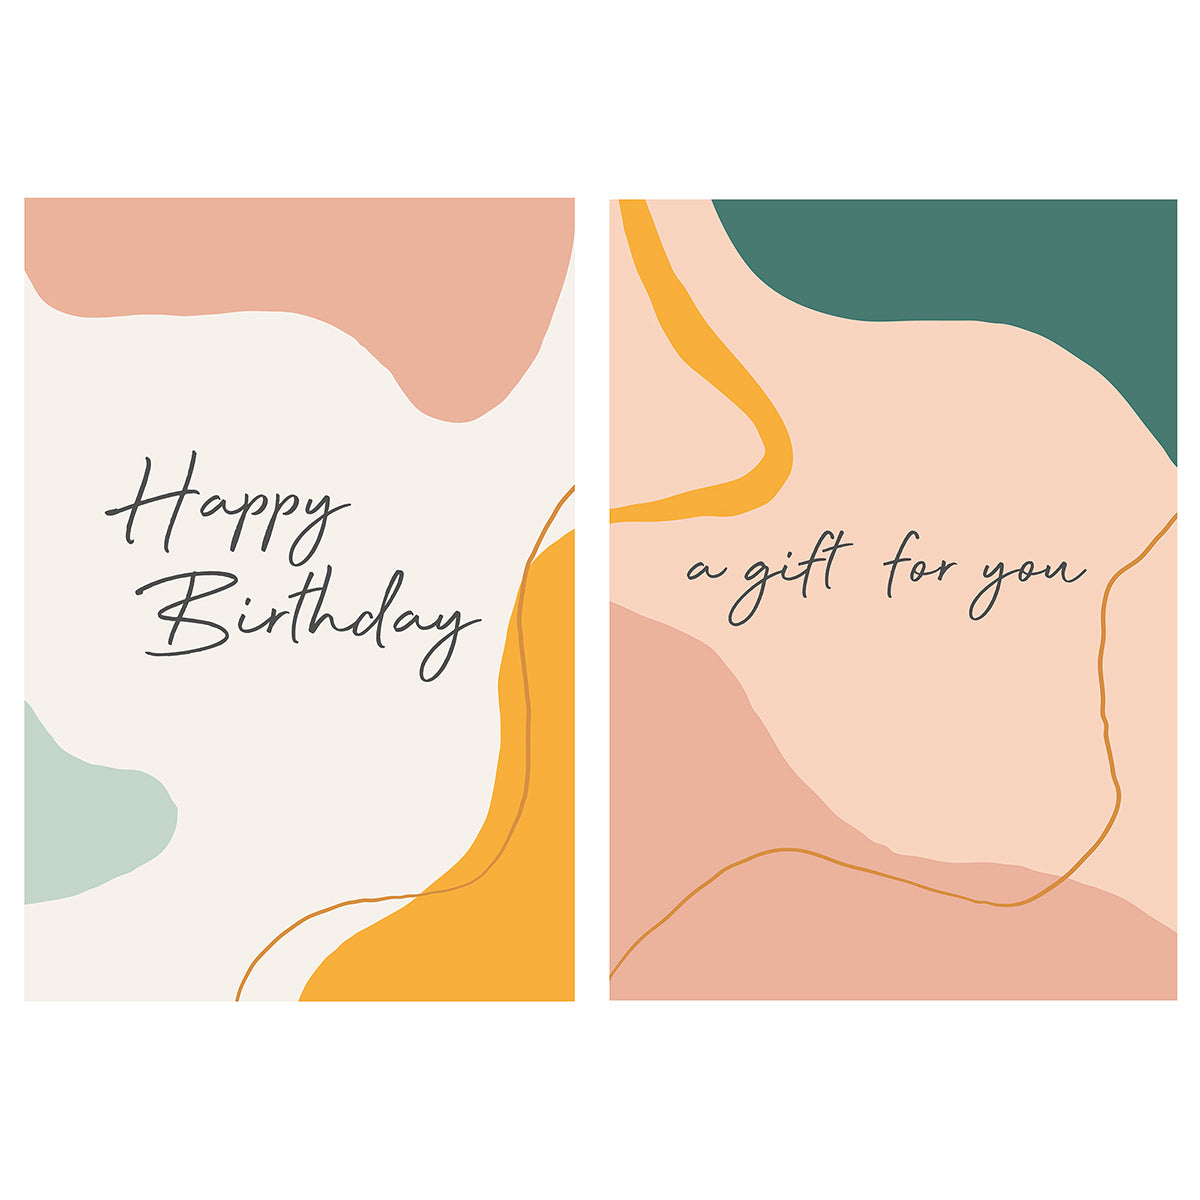 Two minimalist greeting cards side by side. The left card has a pale background with abstract shapes in pastel green and mustard yellow, and the text "Happy Birthday" in a casual script font. The right card features similar abstract shapes in a muted peach and dark green, with the phrase "a gift for you" in matching script. The design is modern and elegant with a soft colour palette.